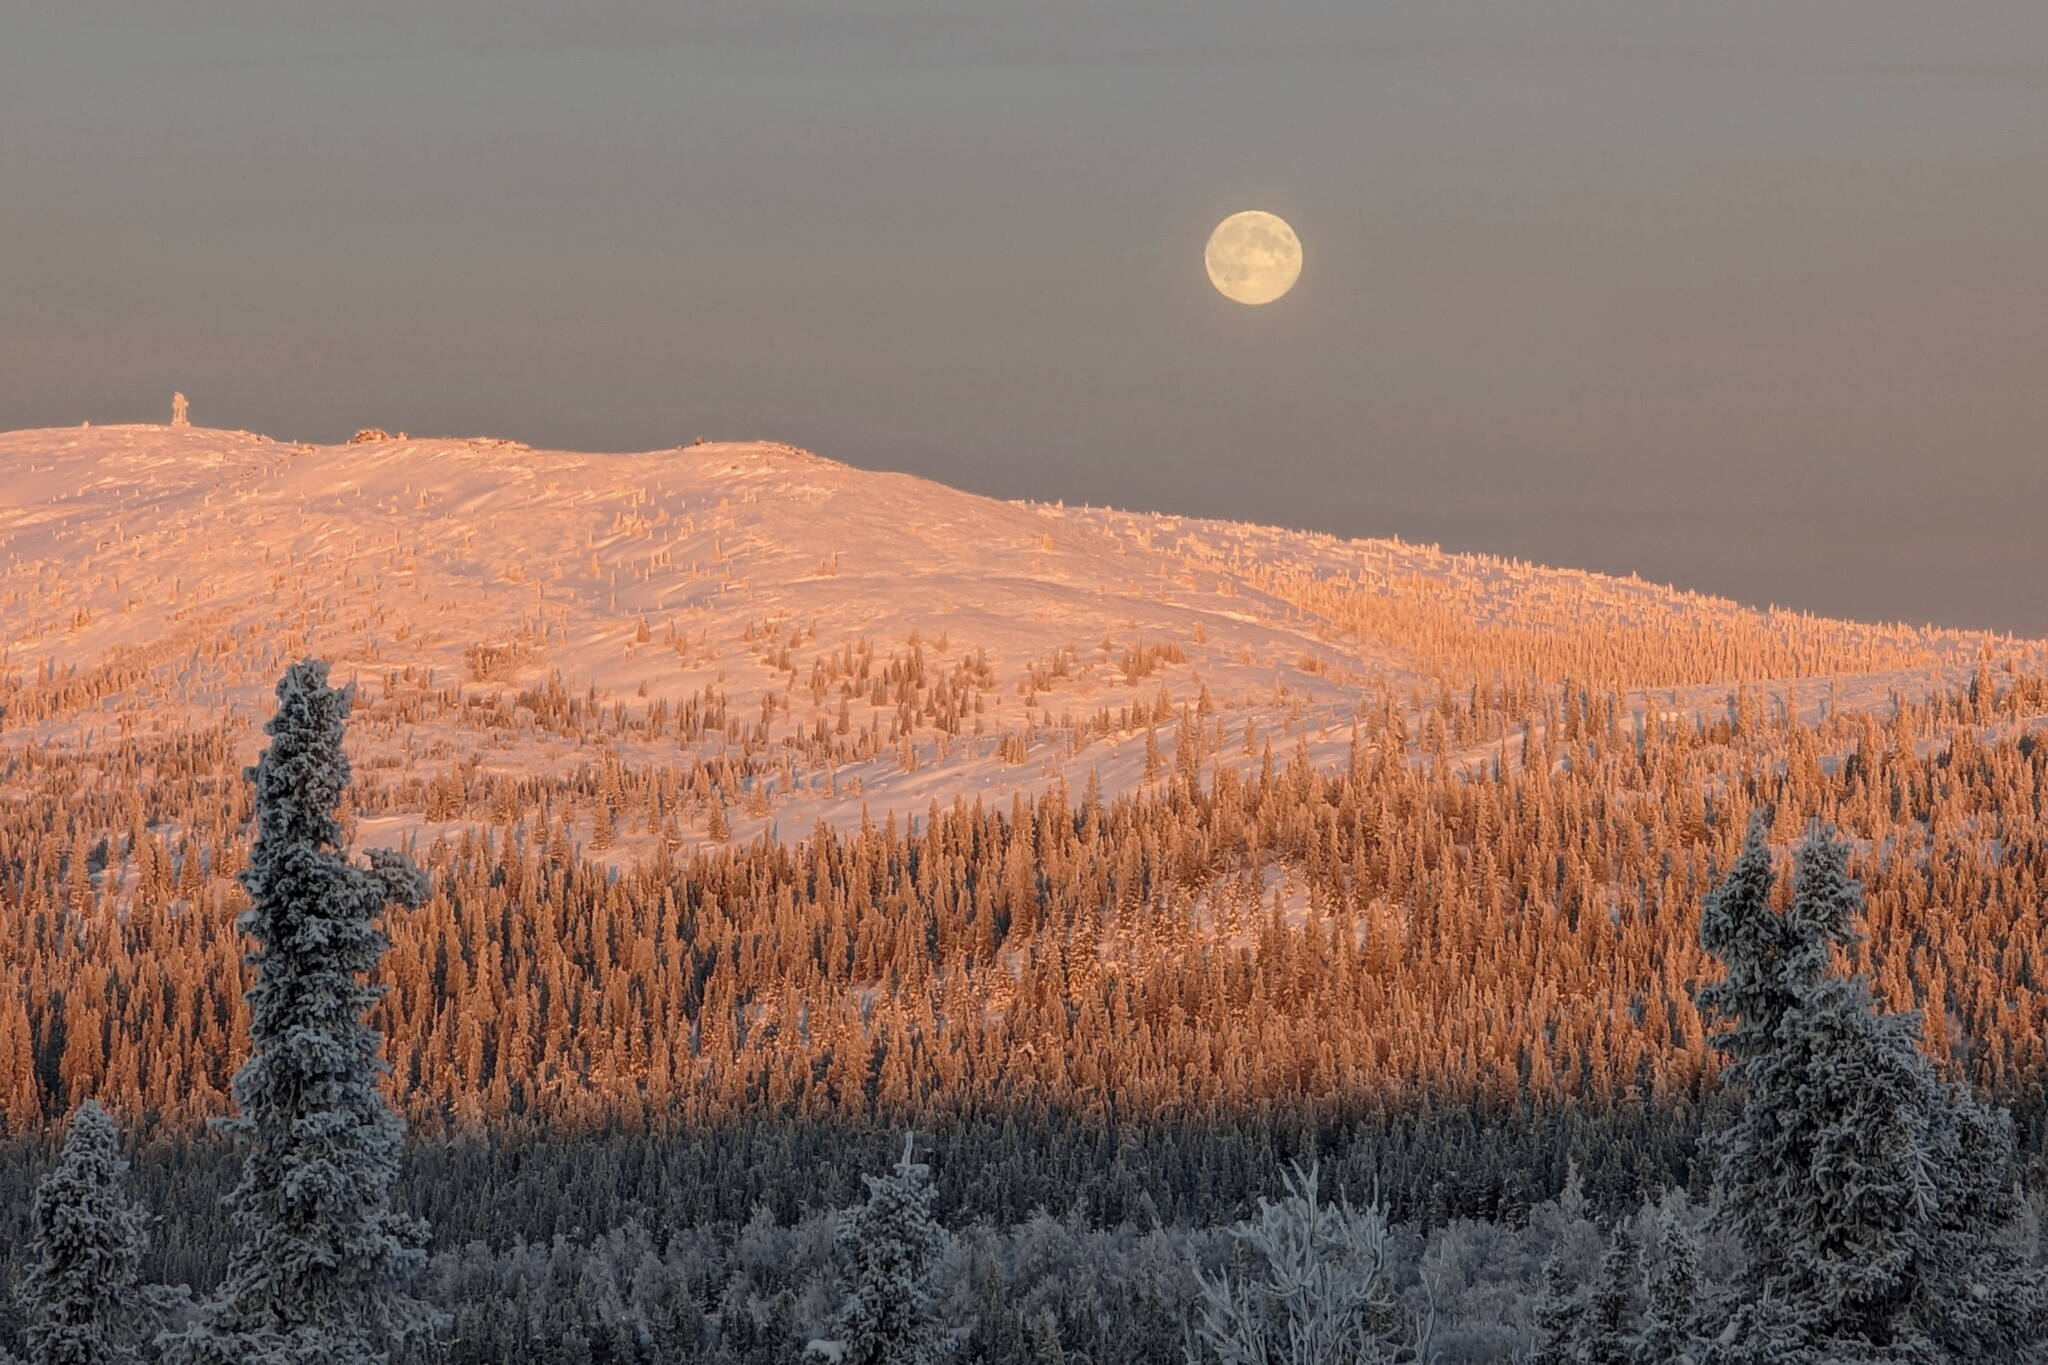 John Eichelberger of Fairbanks took this photo of the full moon on Dec. 26 north of Fairbanks. At the time he took this photo — solar noon in Fairbanks or about 1 p.m. local time — the full moon appeared due north of him. (Photo by John Eichelberger)